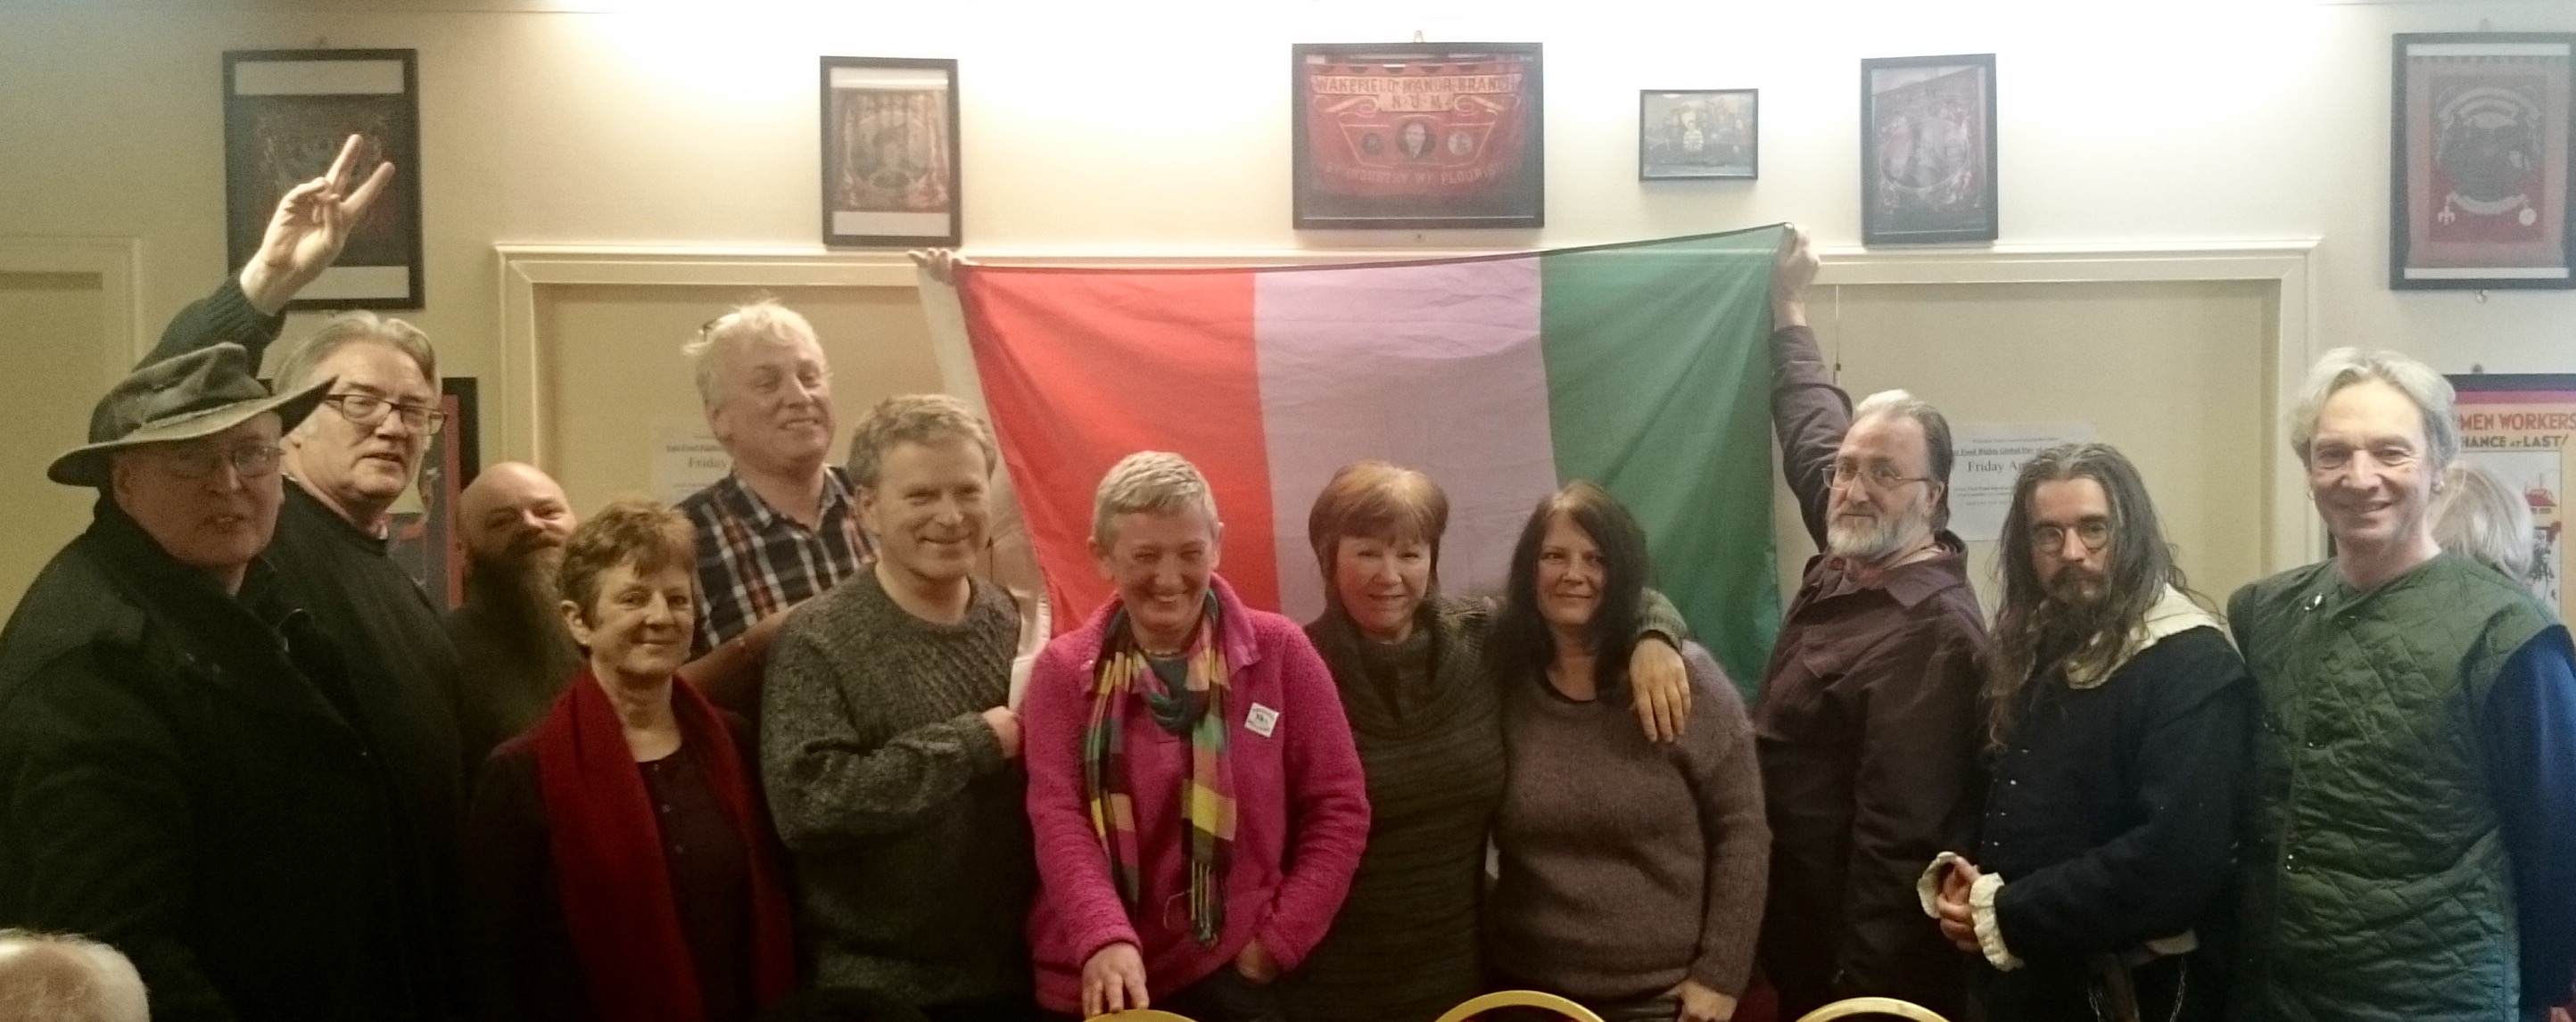 Levellers and Diggers meeting with over 40 people discussing England's democratic revolution, and here are a few rebels with the people's flag 